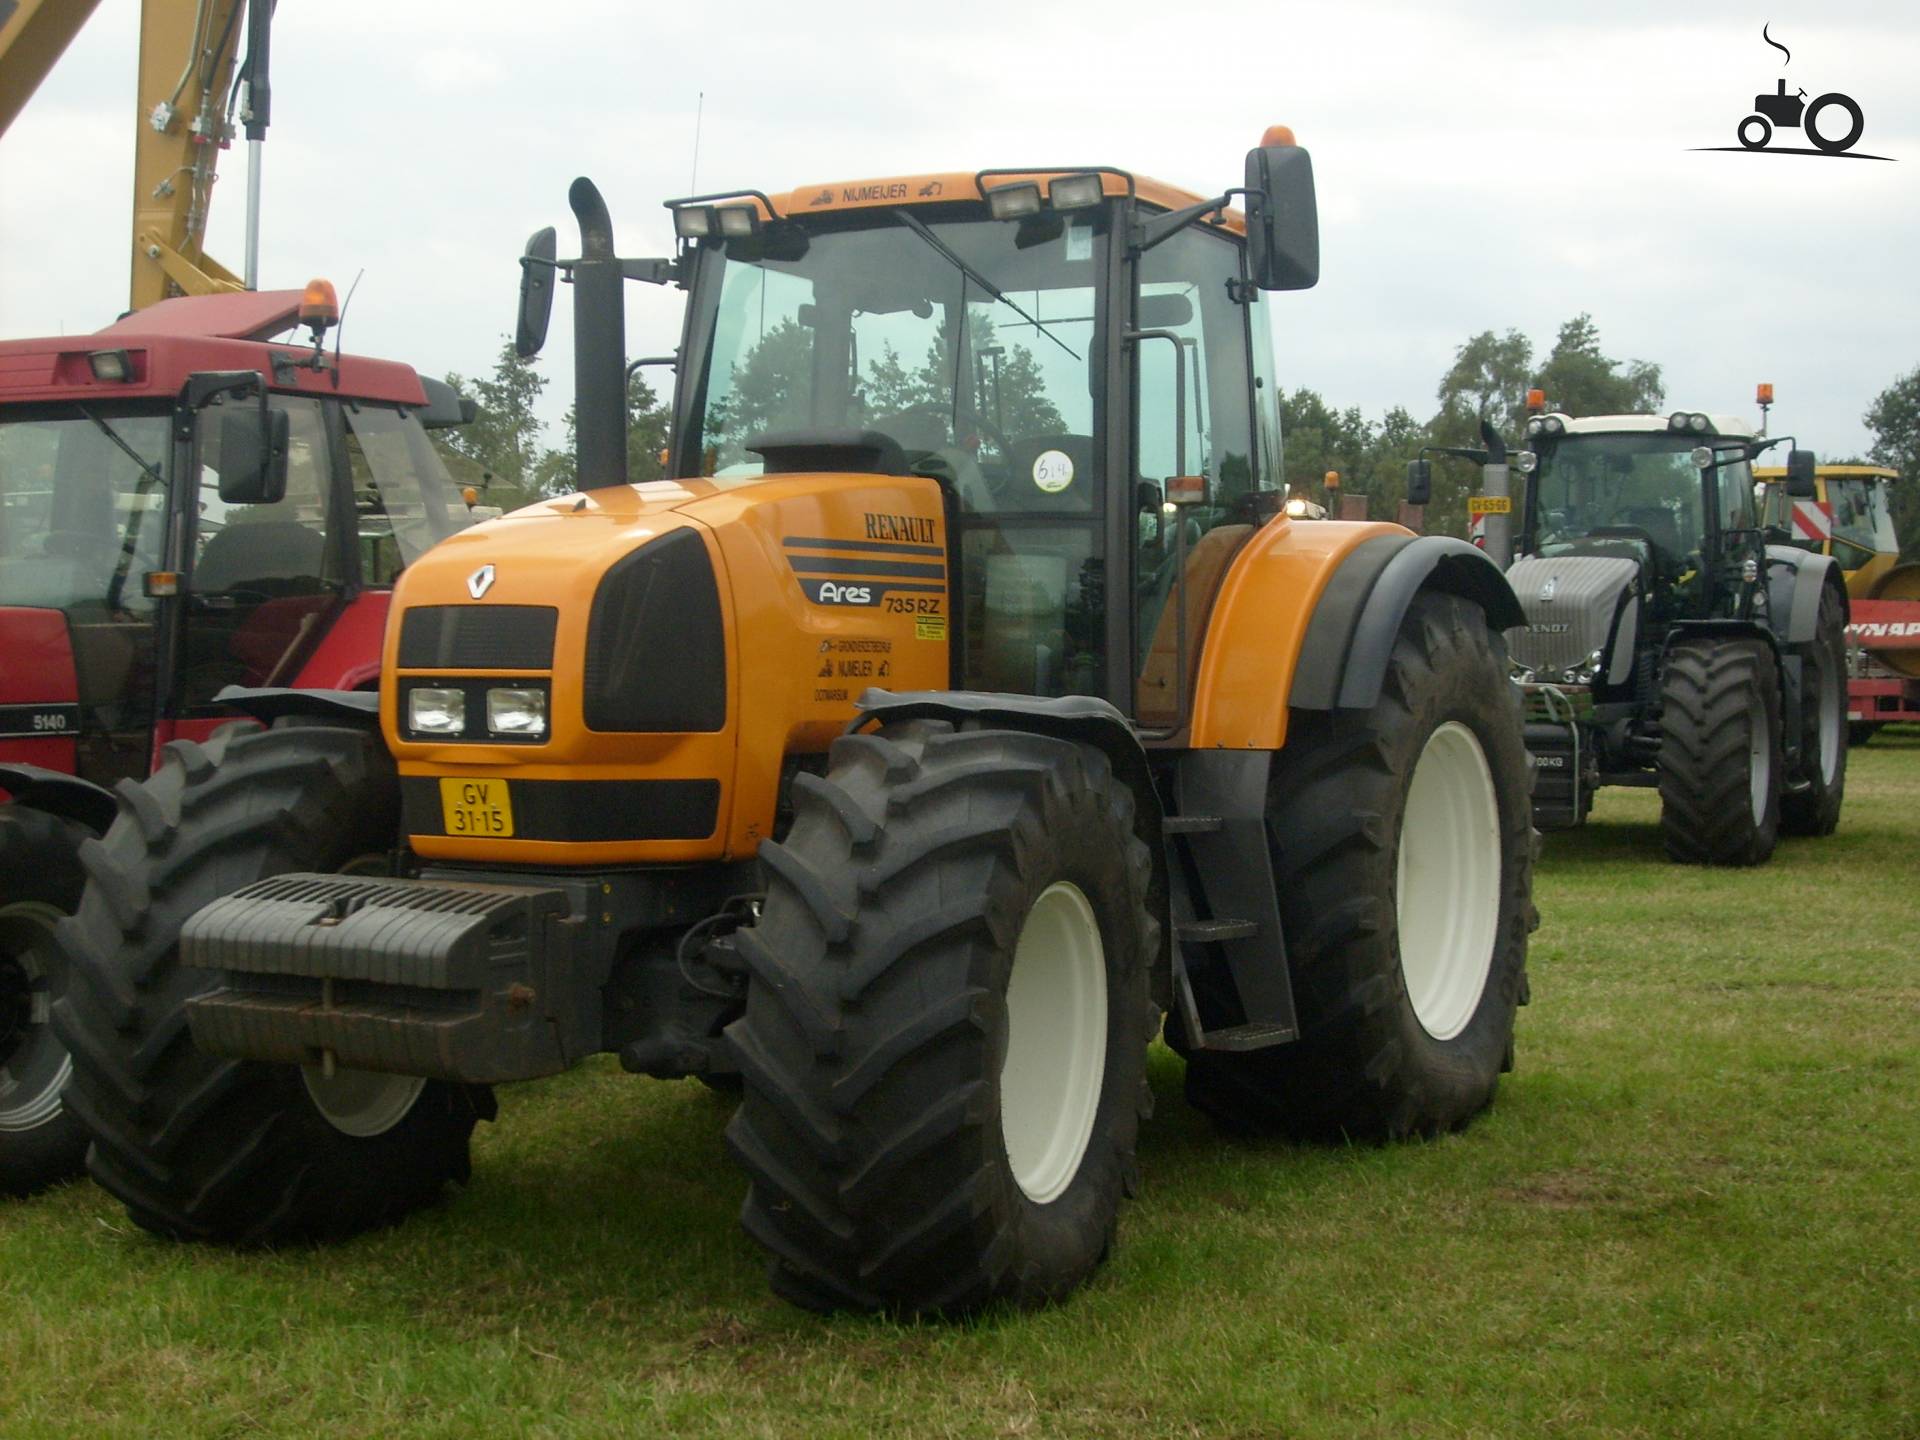 Renault Ares 735 RZ